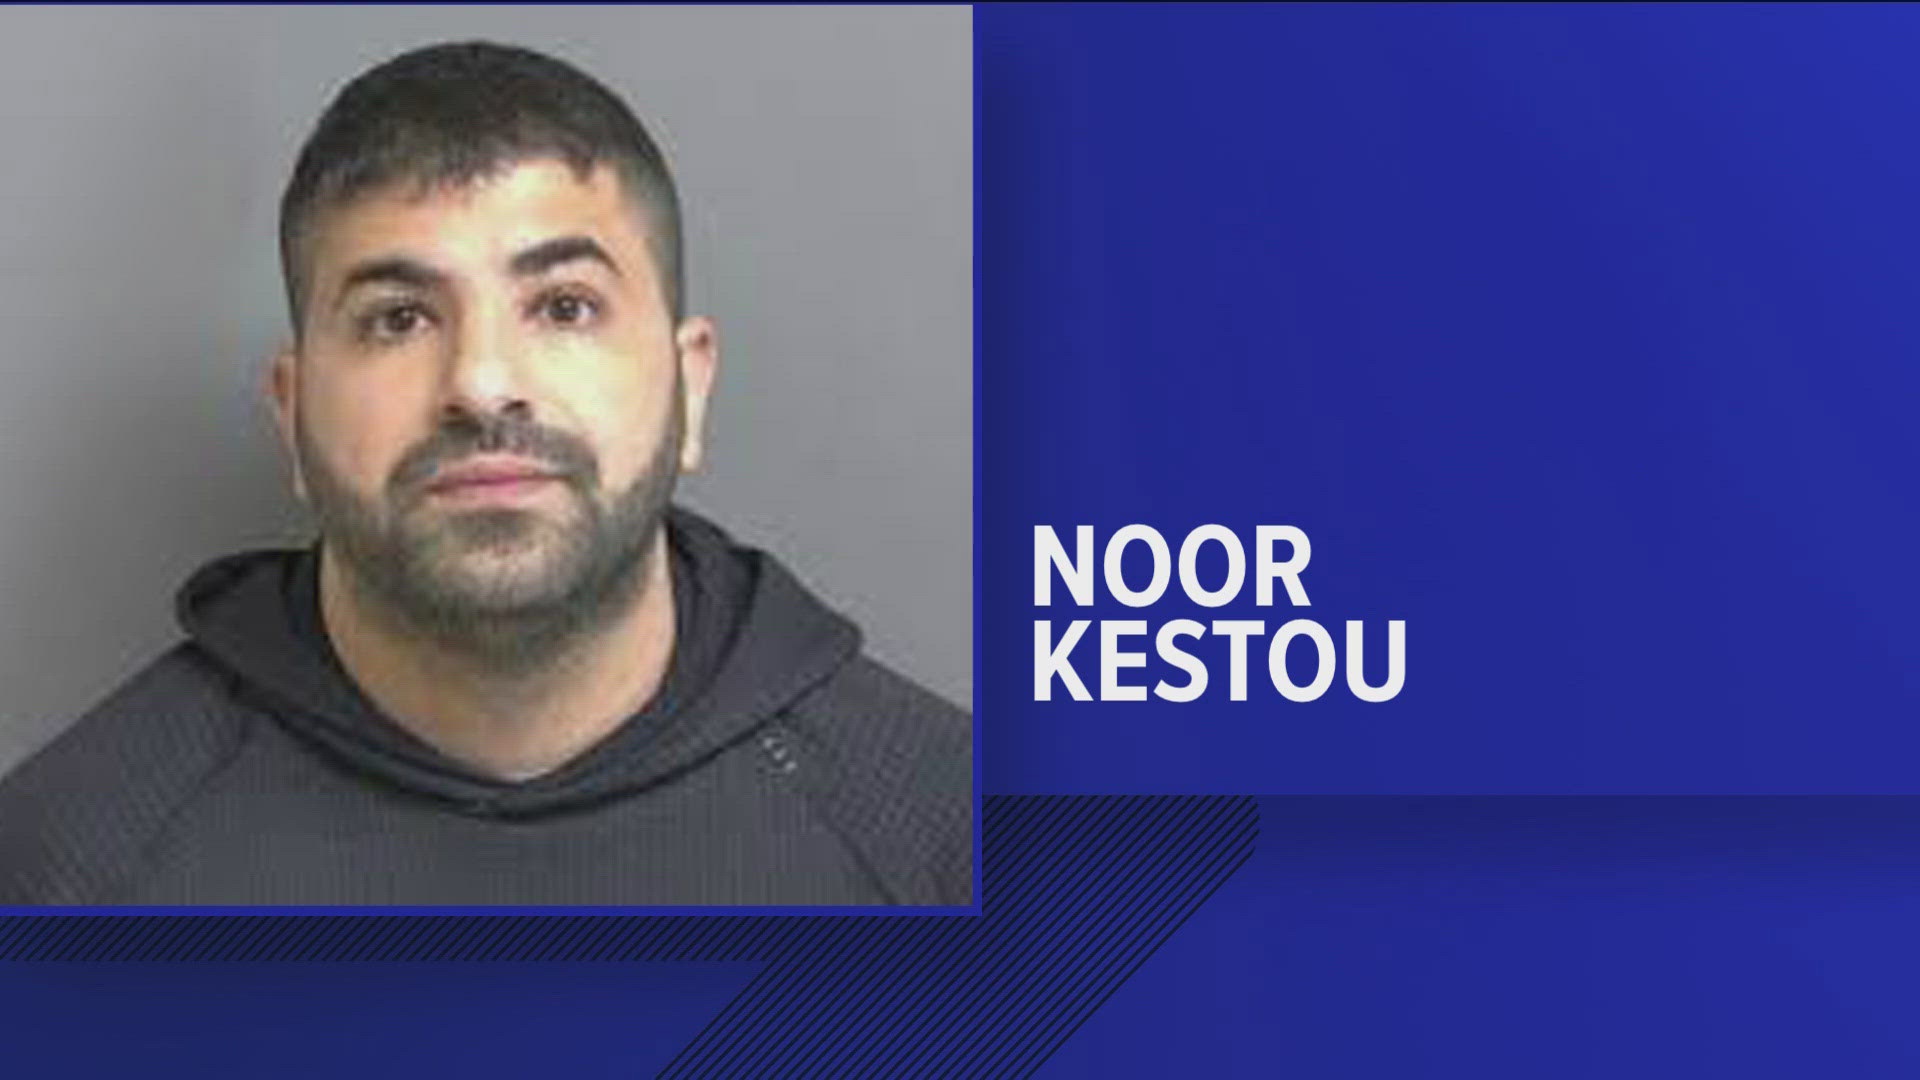 Noor Noel Kestou, 31, was charged with involuntary manslaughter in connection with the explosion that killed a 19-year-old about a quarter of a mile away.